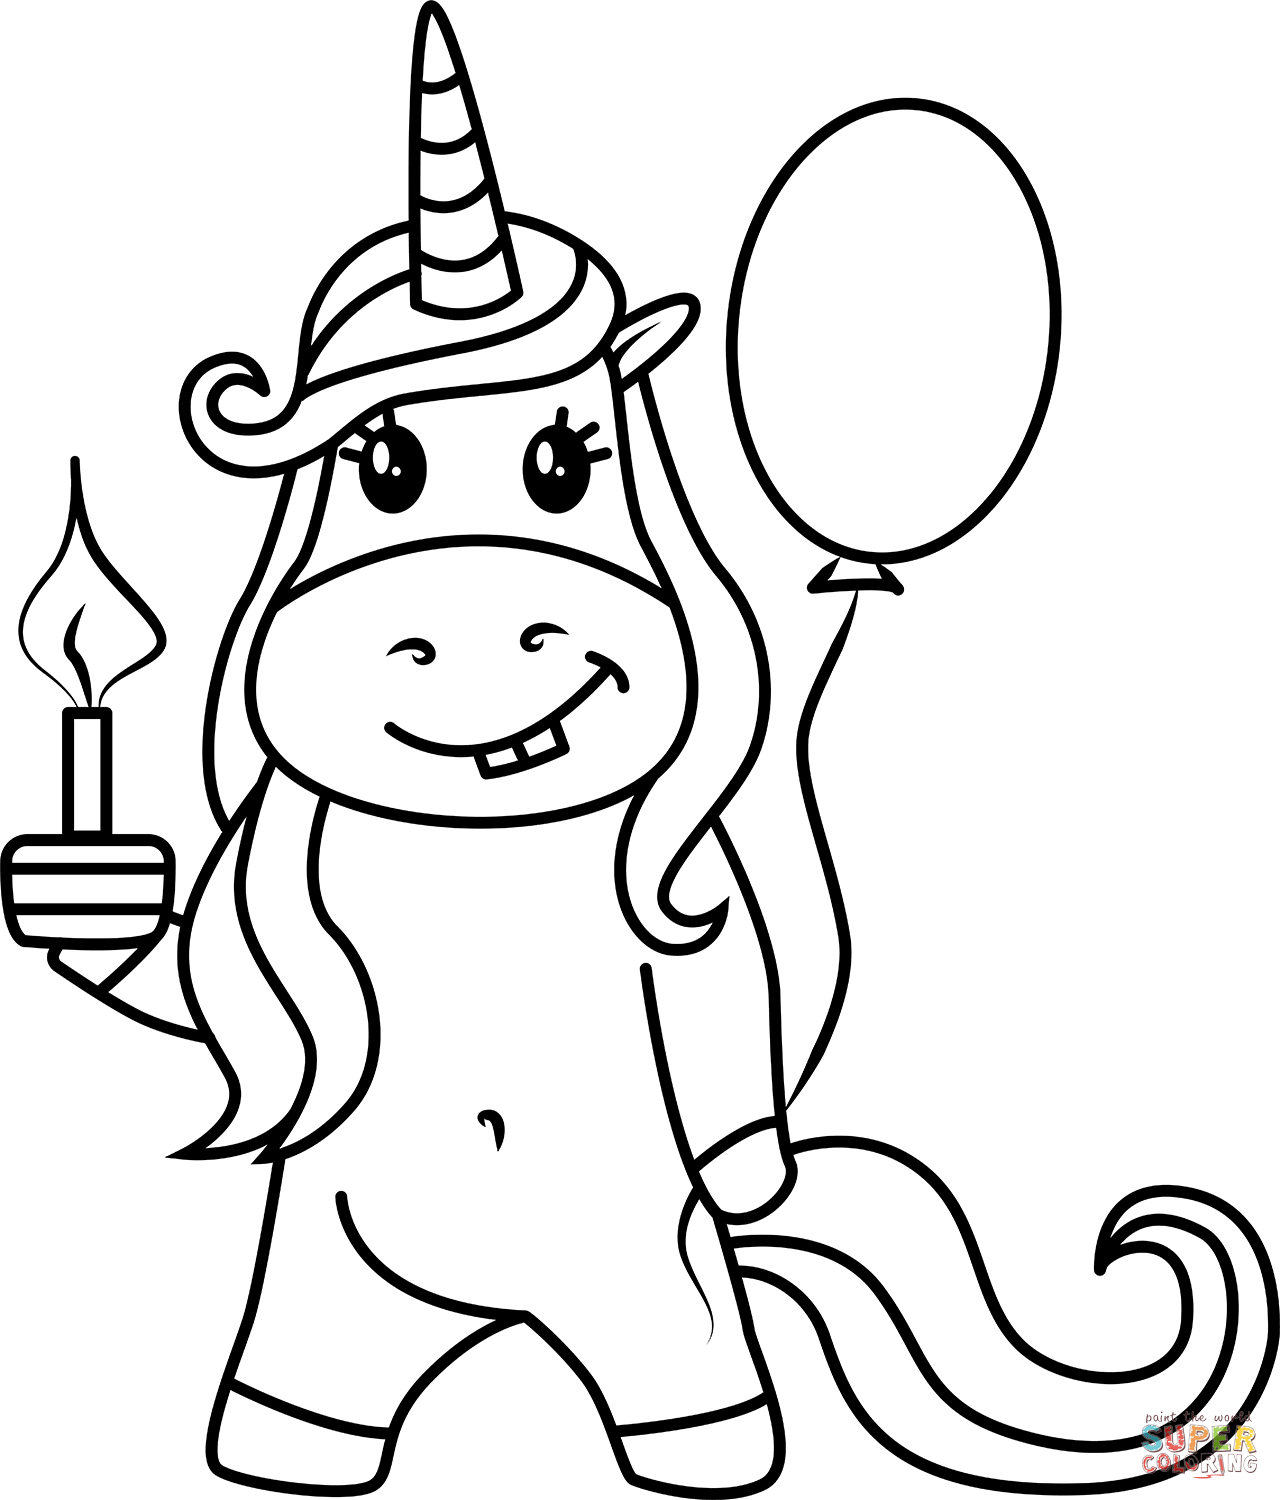 Unicorn Birthday coloring page | Free Printable Coloring Pages